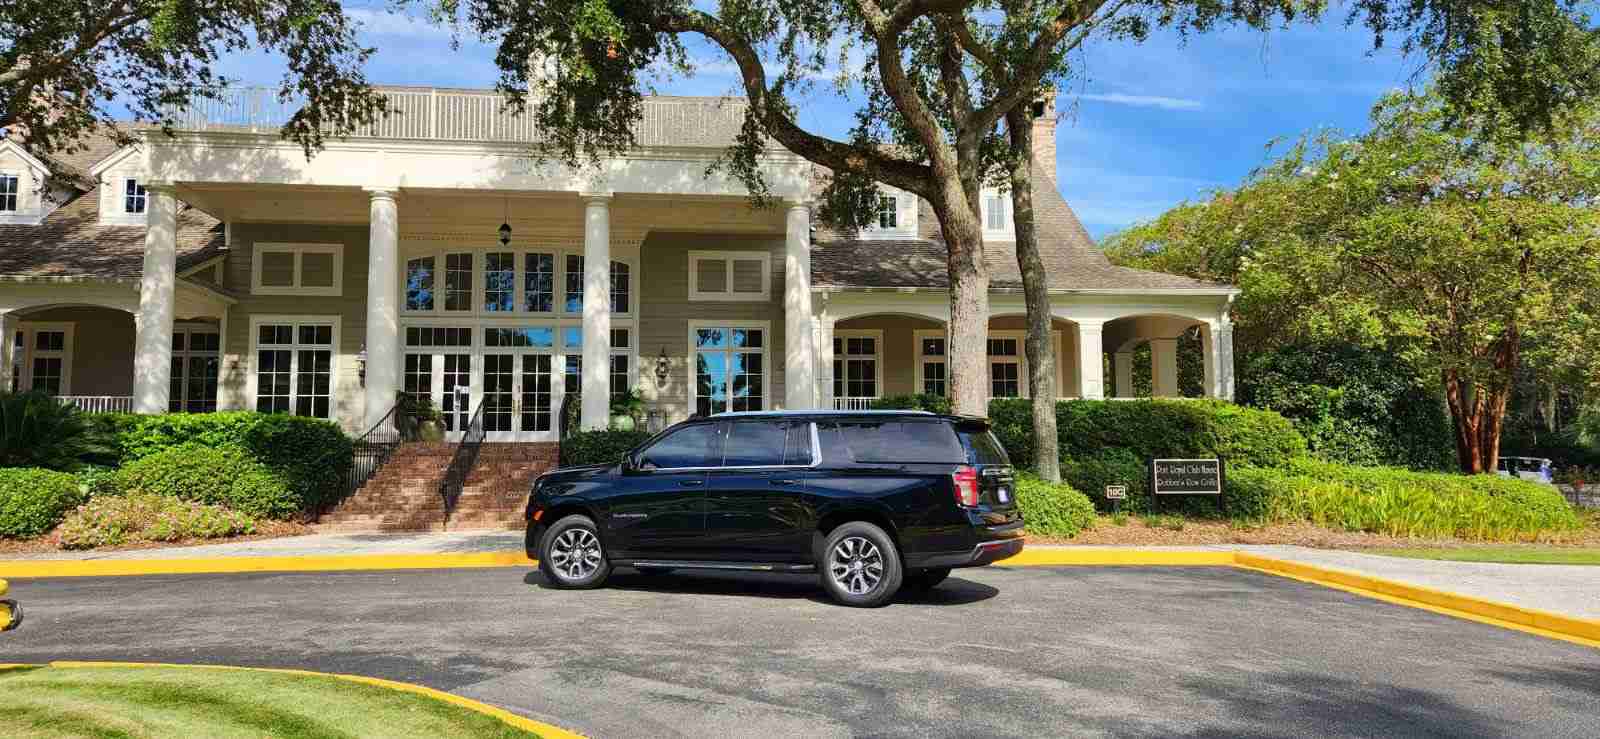 Scenic Hilton Head to Savannah Airport Route - Travel Efficiently